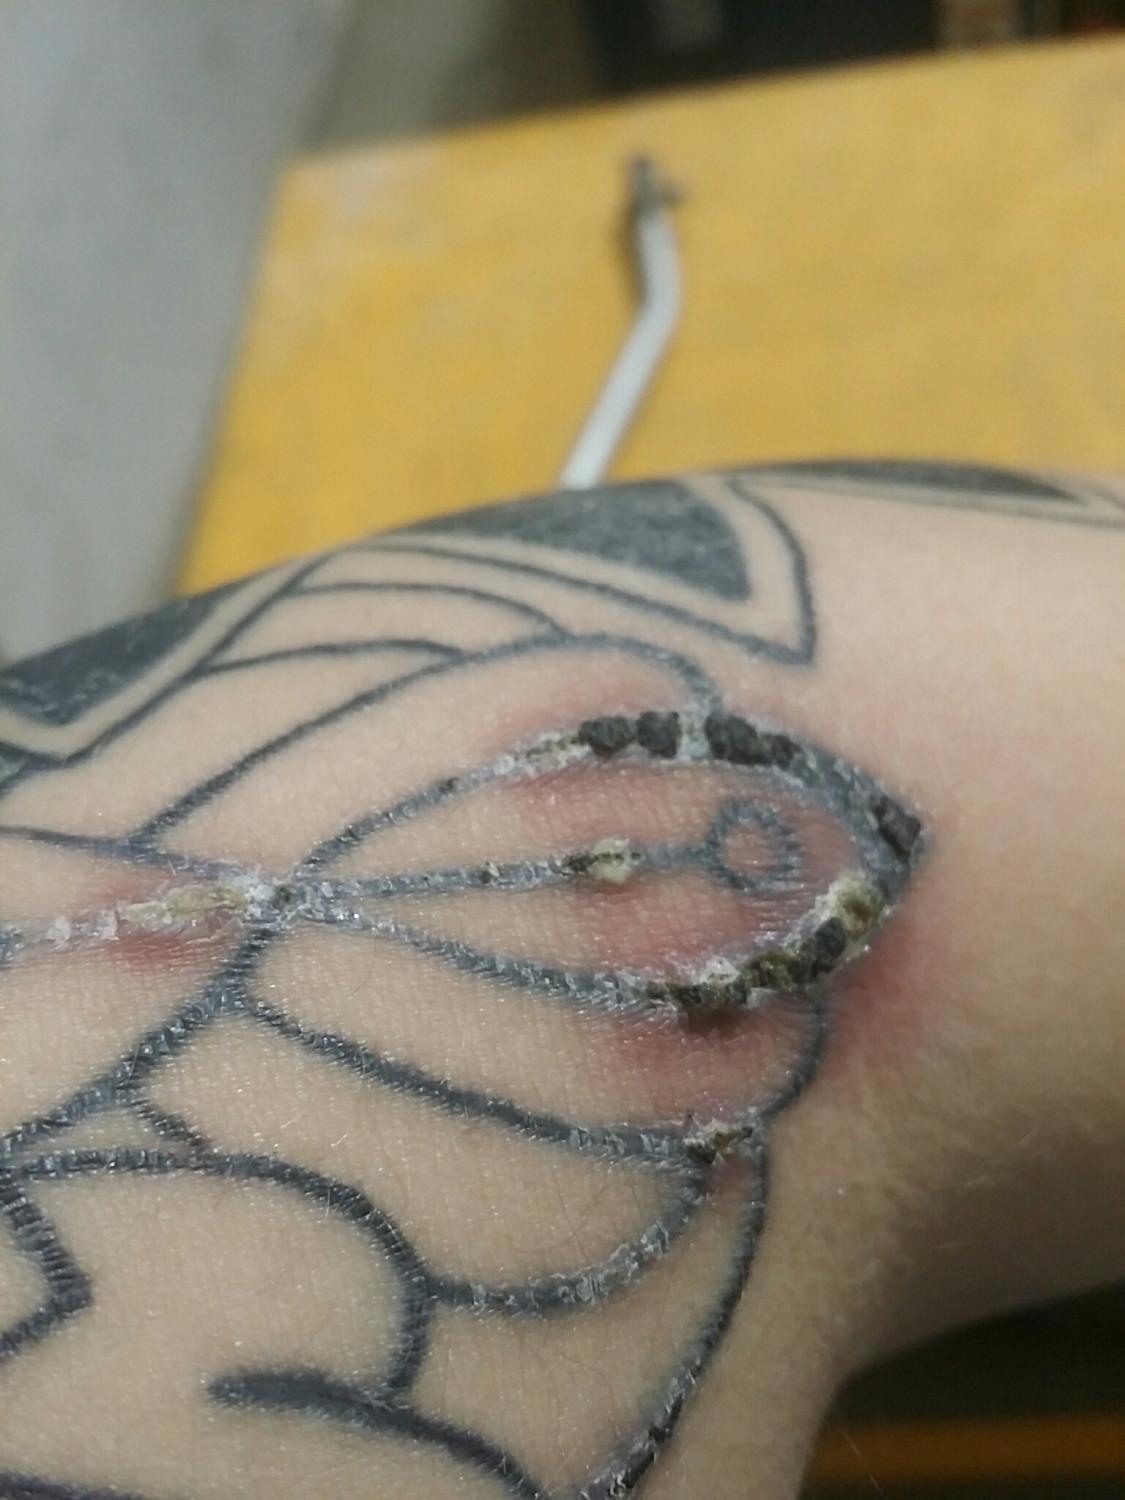 Tattoo Scabbing peeling off the scabs  YouTube